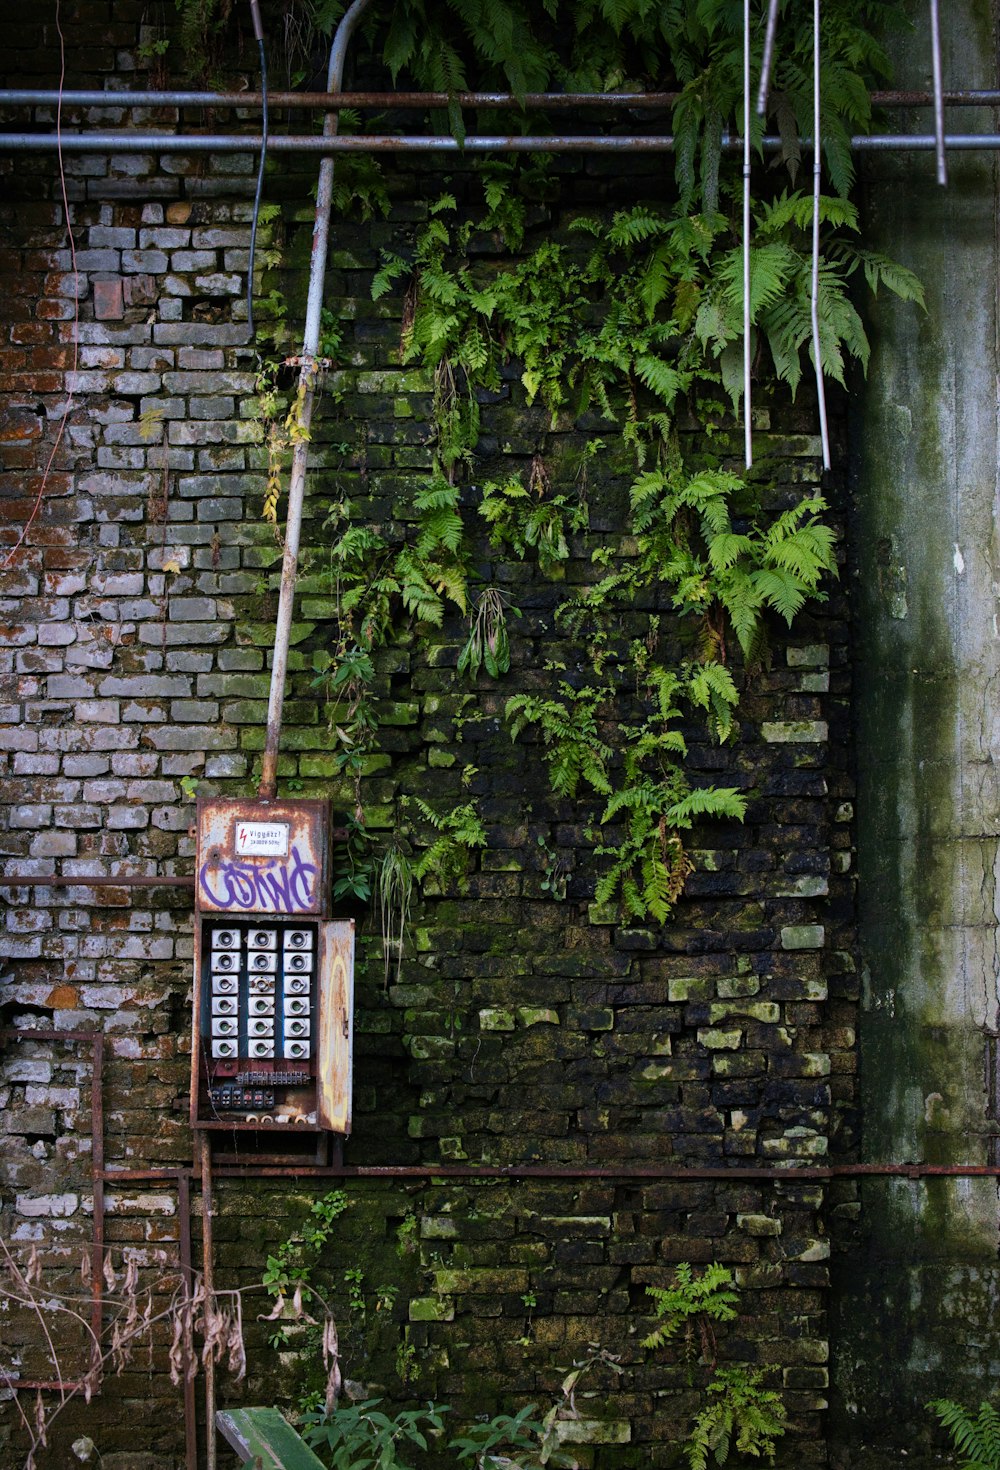 an old machine sitting in front of a brick wall